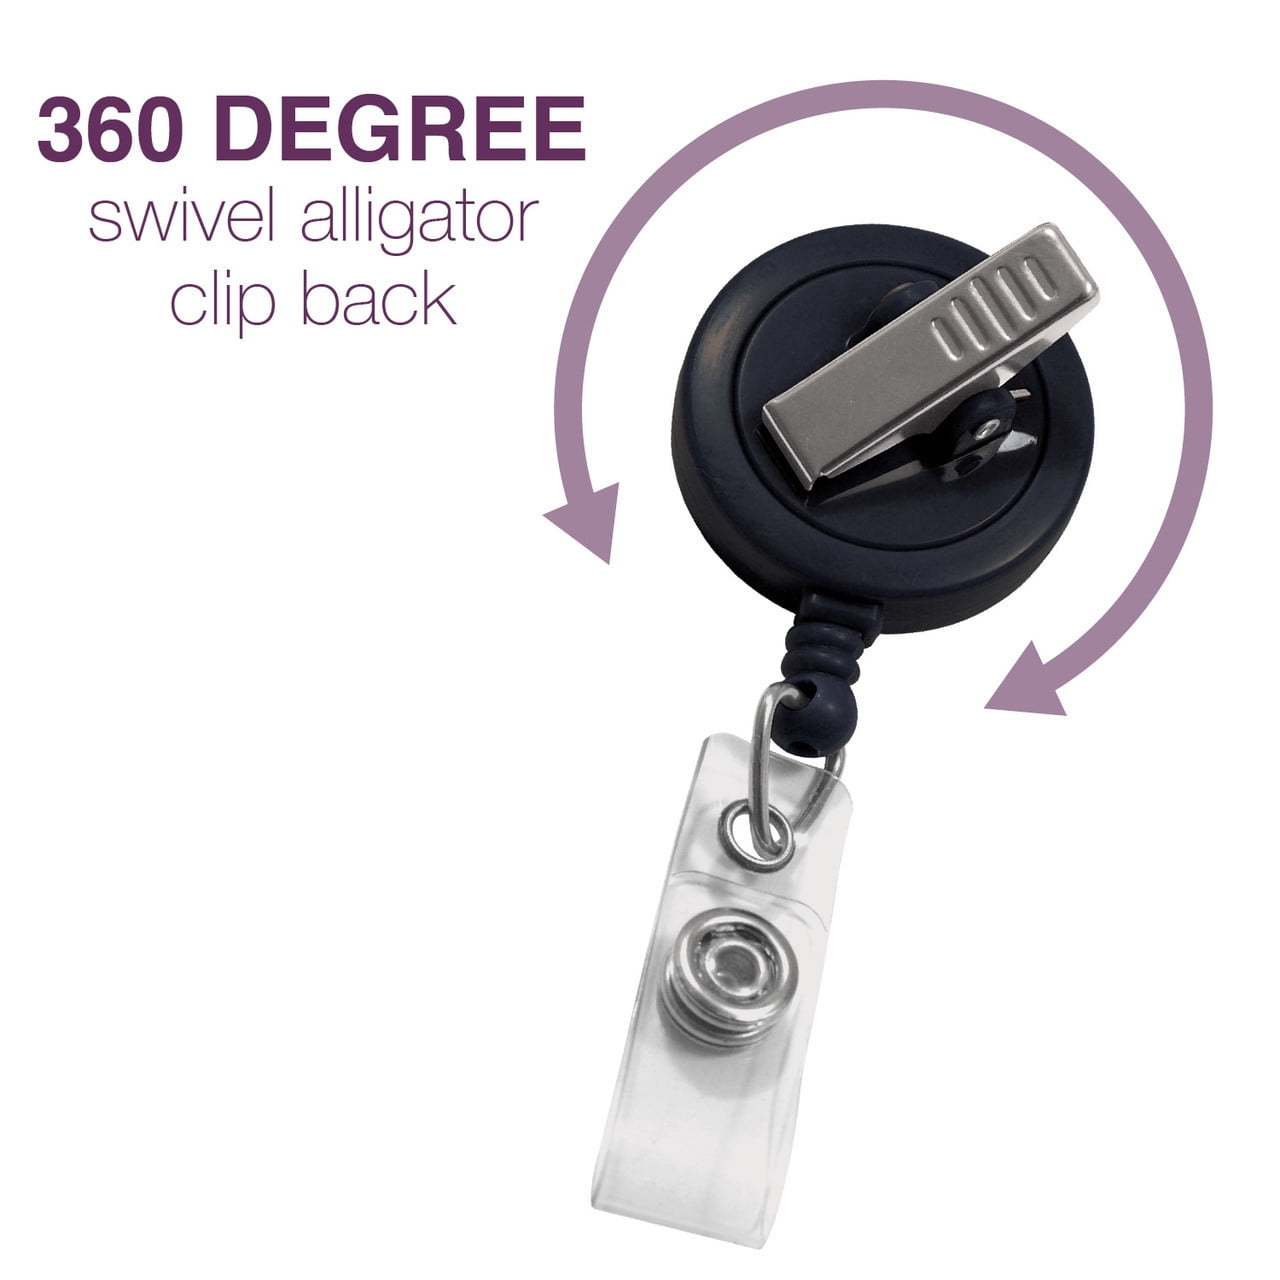 We Bring Out The Kid in You ID Avenue Retractable Badge Holder 32 Nurse Badge Reels Retractable for Nurses Doctors Teachers Students with 360° Swivel Alligator Clip Cute Badge Holder 